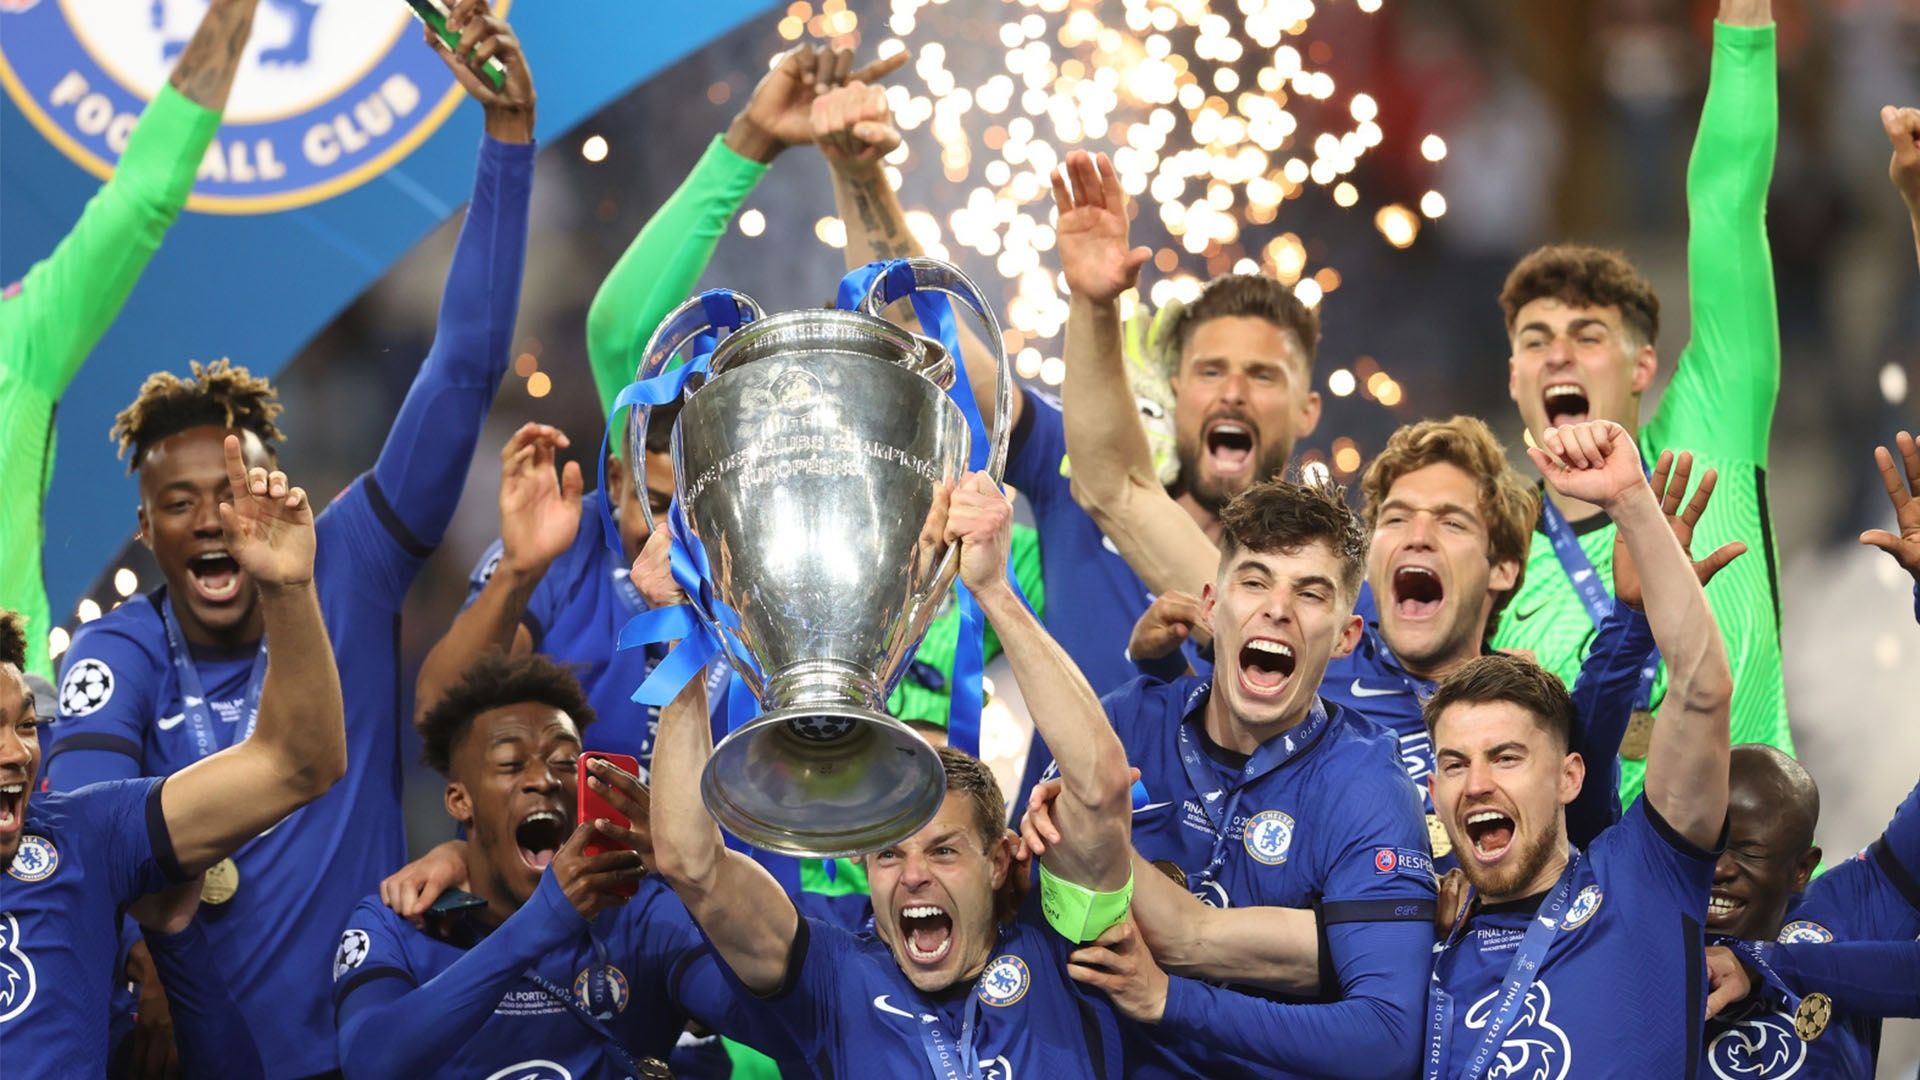 Chelsea's Champions League victory feels like the beginning of a new era for the club